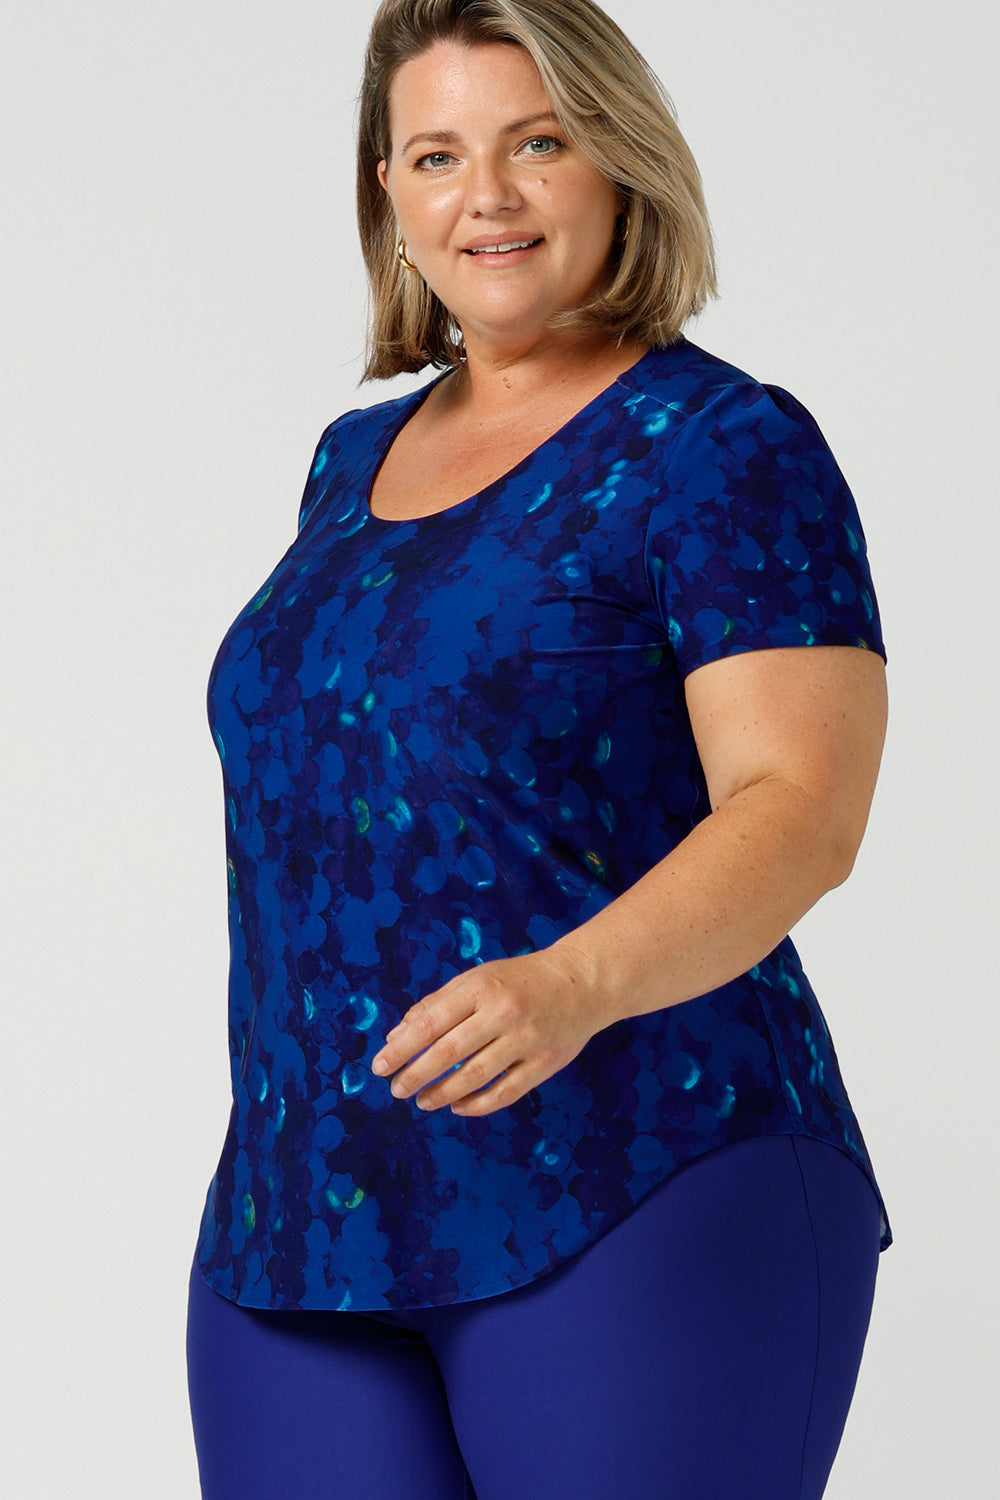 A plus size, size 18 woman wears a cobalt abstract jersey print, Round neck top with short sleeves. A good top for summer casual wear, or style tucked as a workwear top. Shop made in Australia tops in petite to plus sizes online at Australian fashion brand, Leina & Fleur.